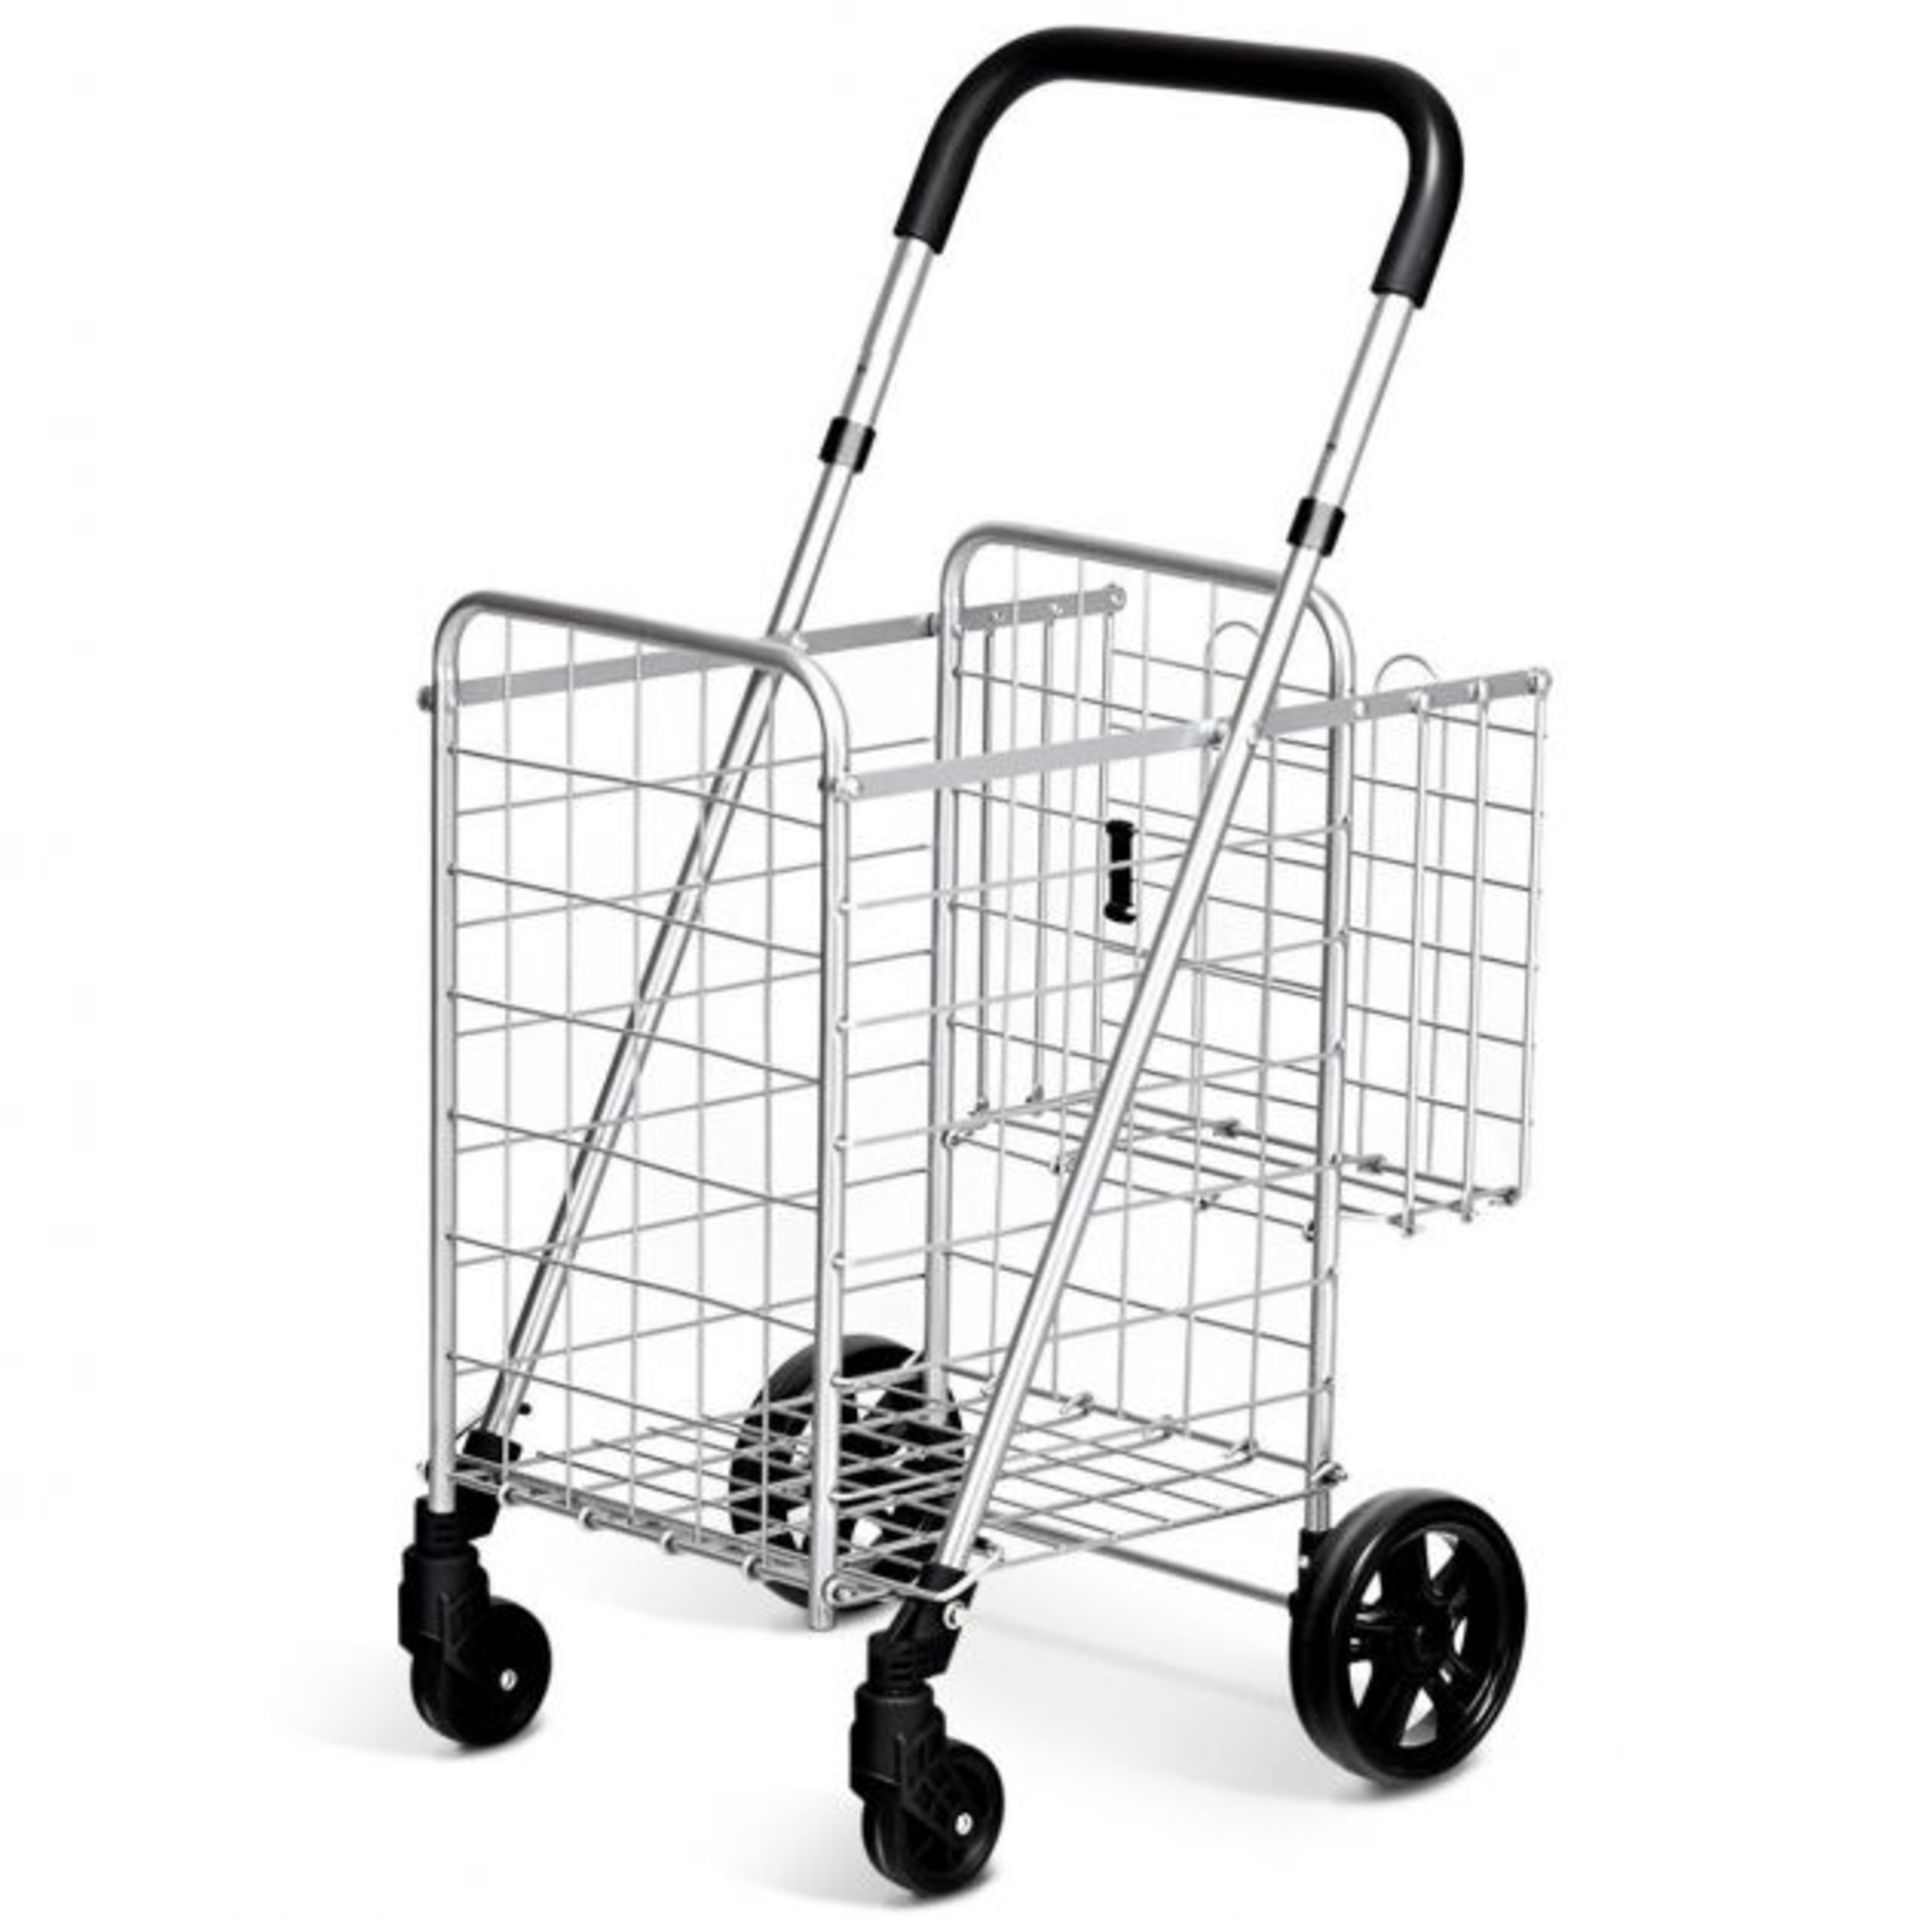 Folding Height Adjustable Shopping Trolley with Handle and Wheels. - PW. Shop with this utility cart